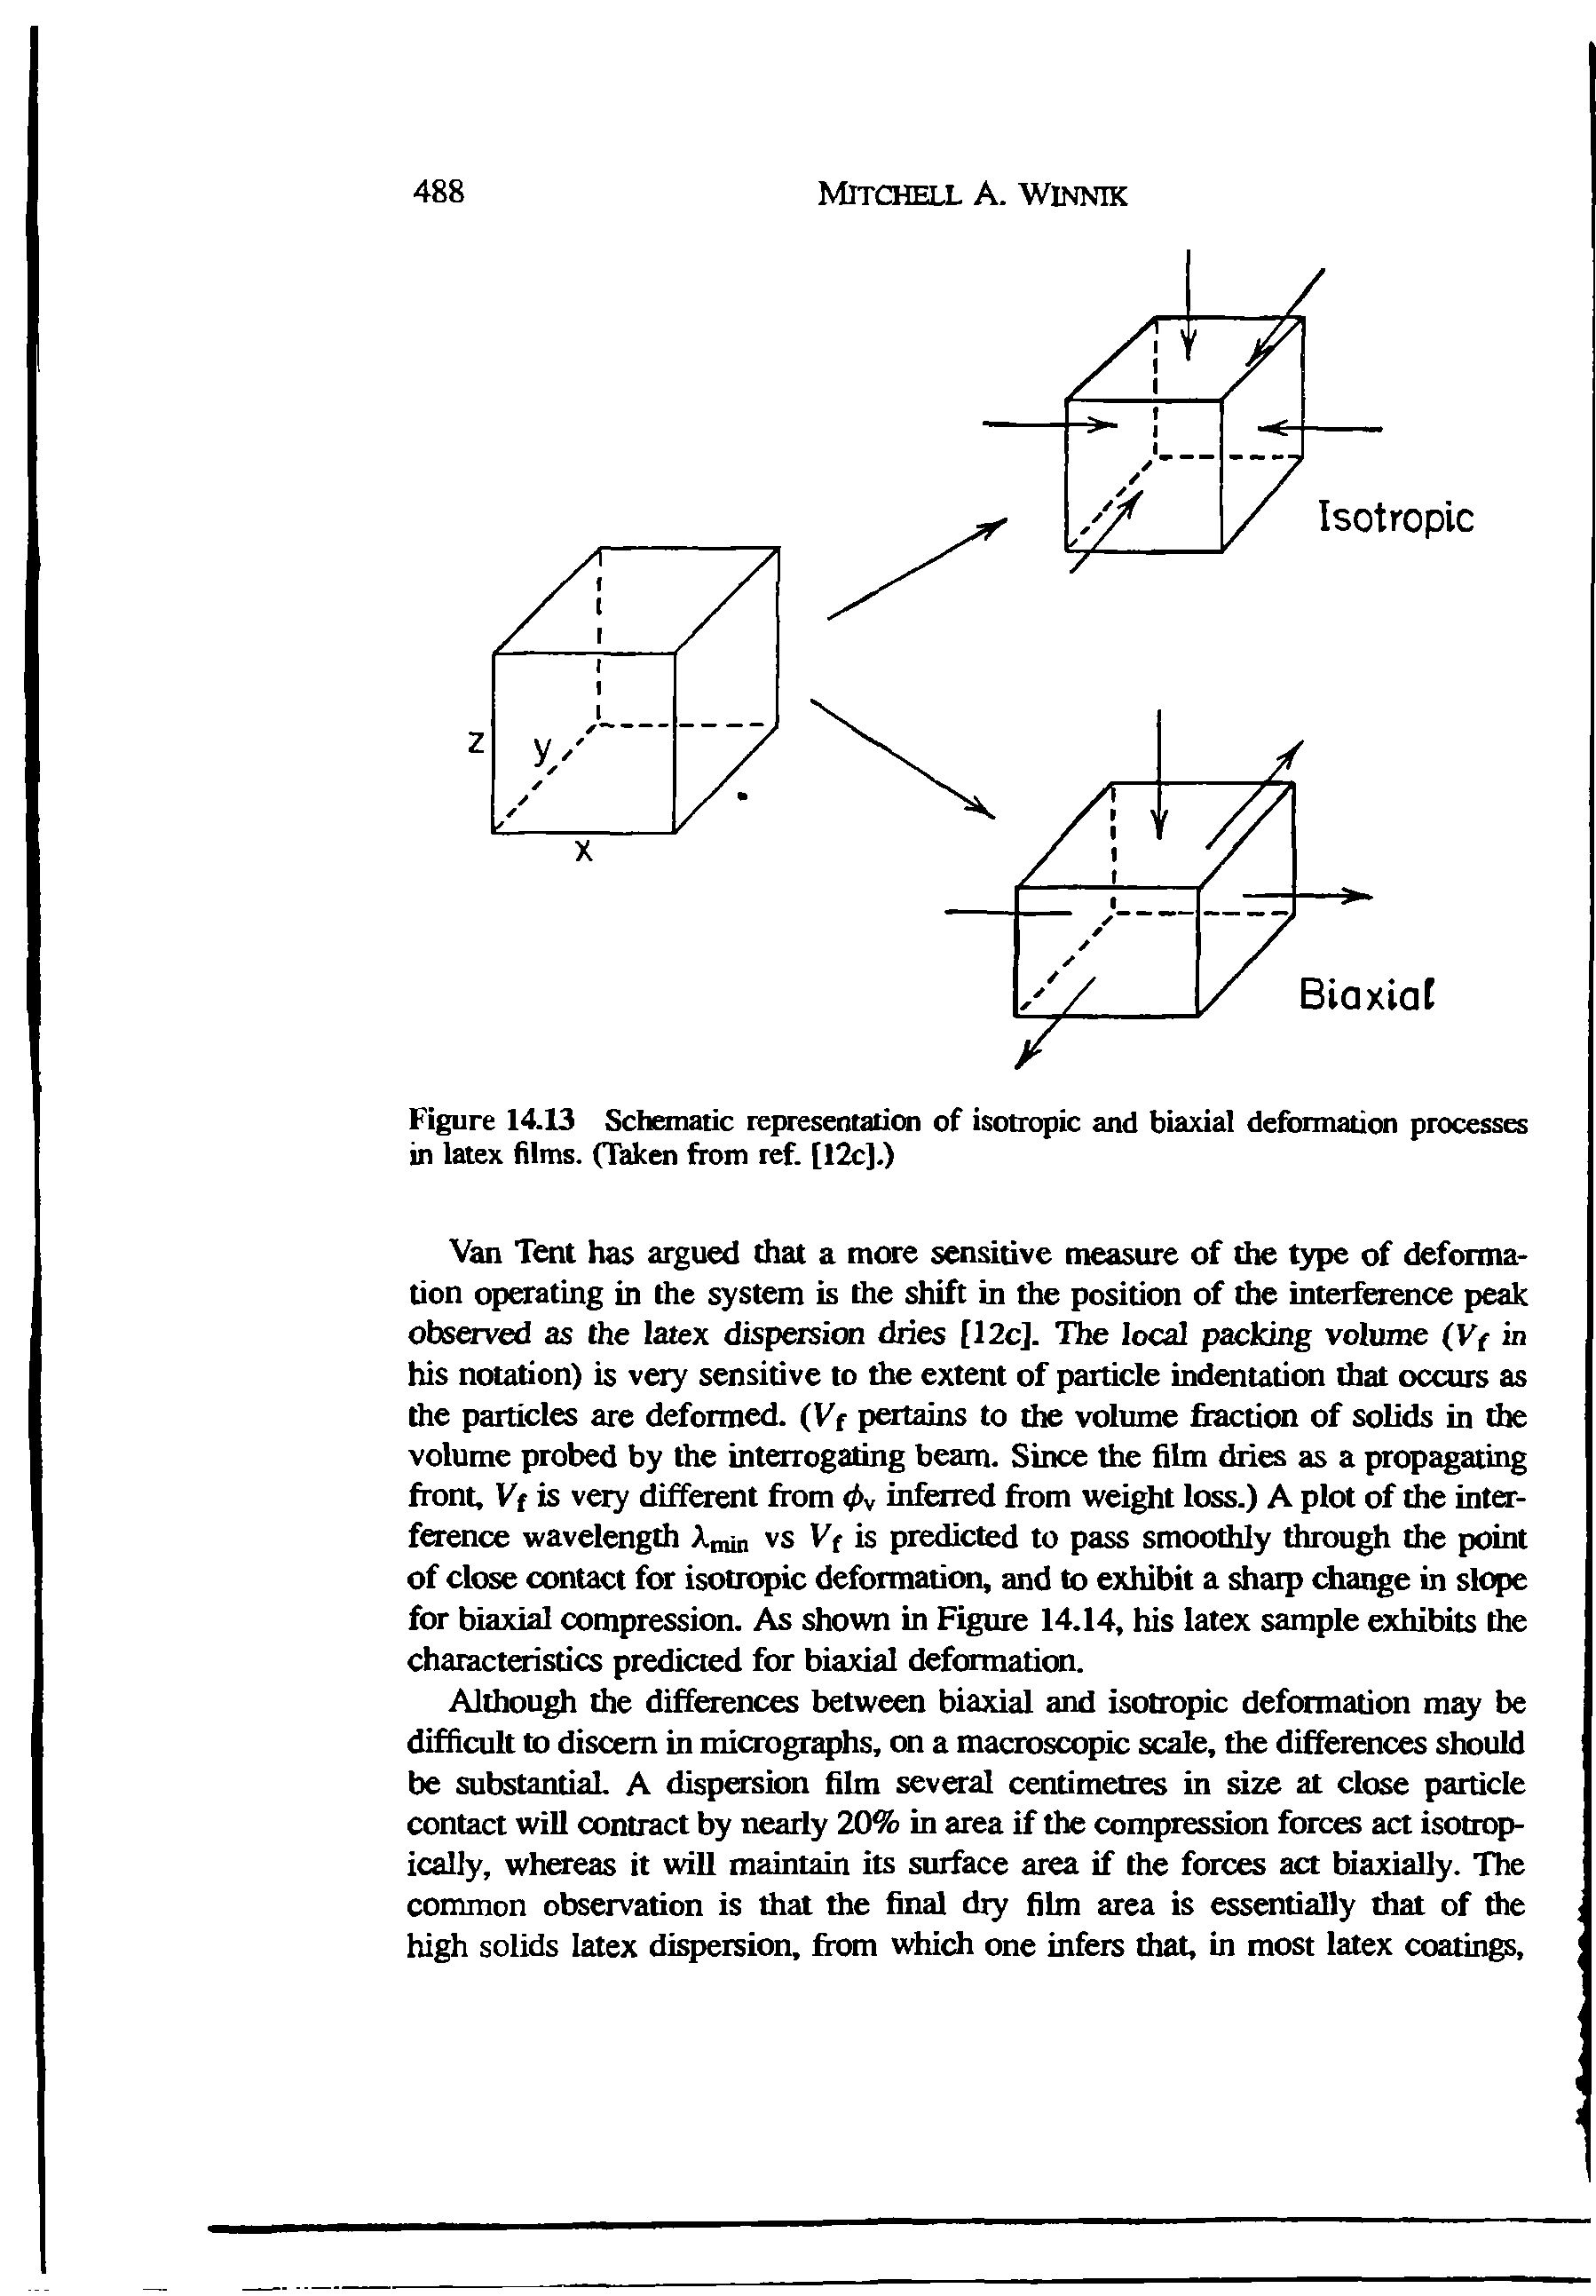 Figure 14 13 Schematic represemation of isotropic and biaxial deformation processes in latex films. (Taken from ref. [12c].)...